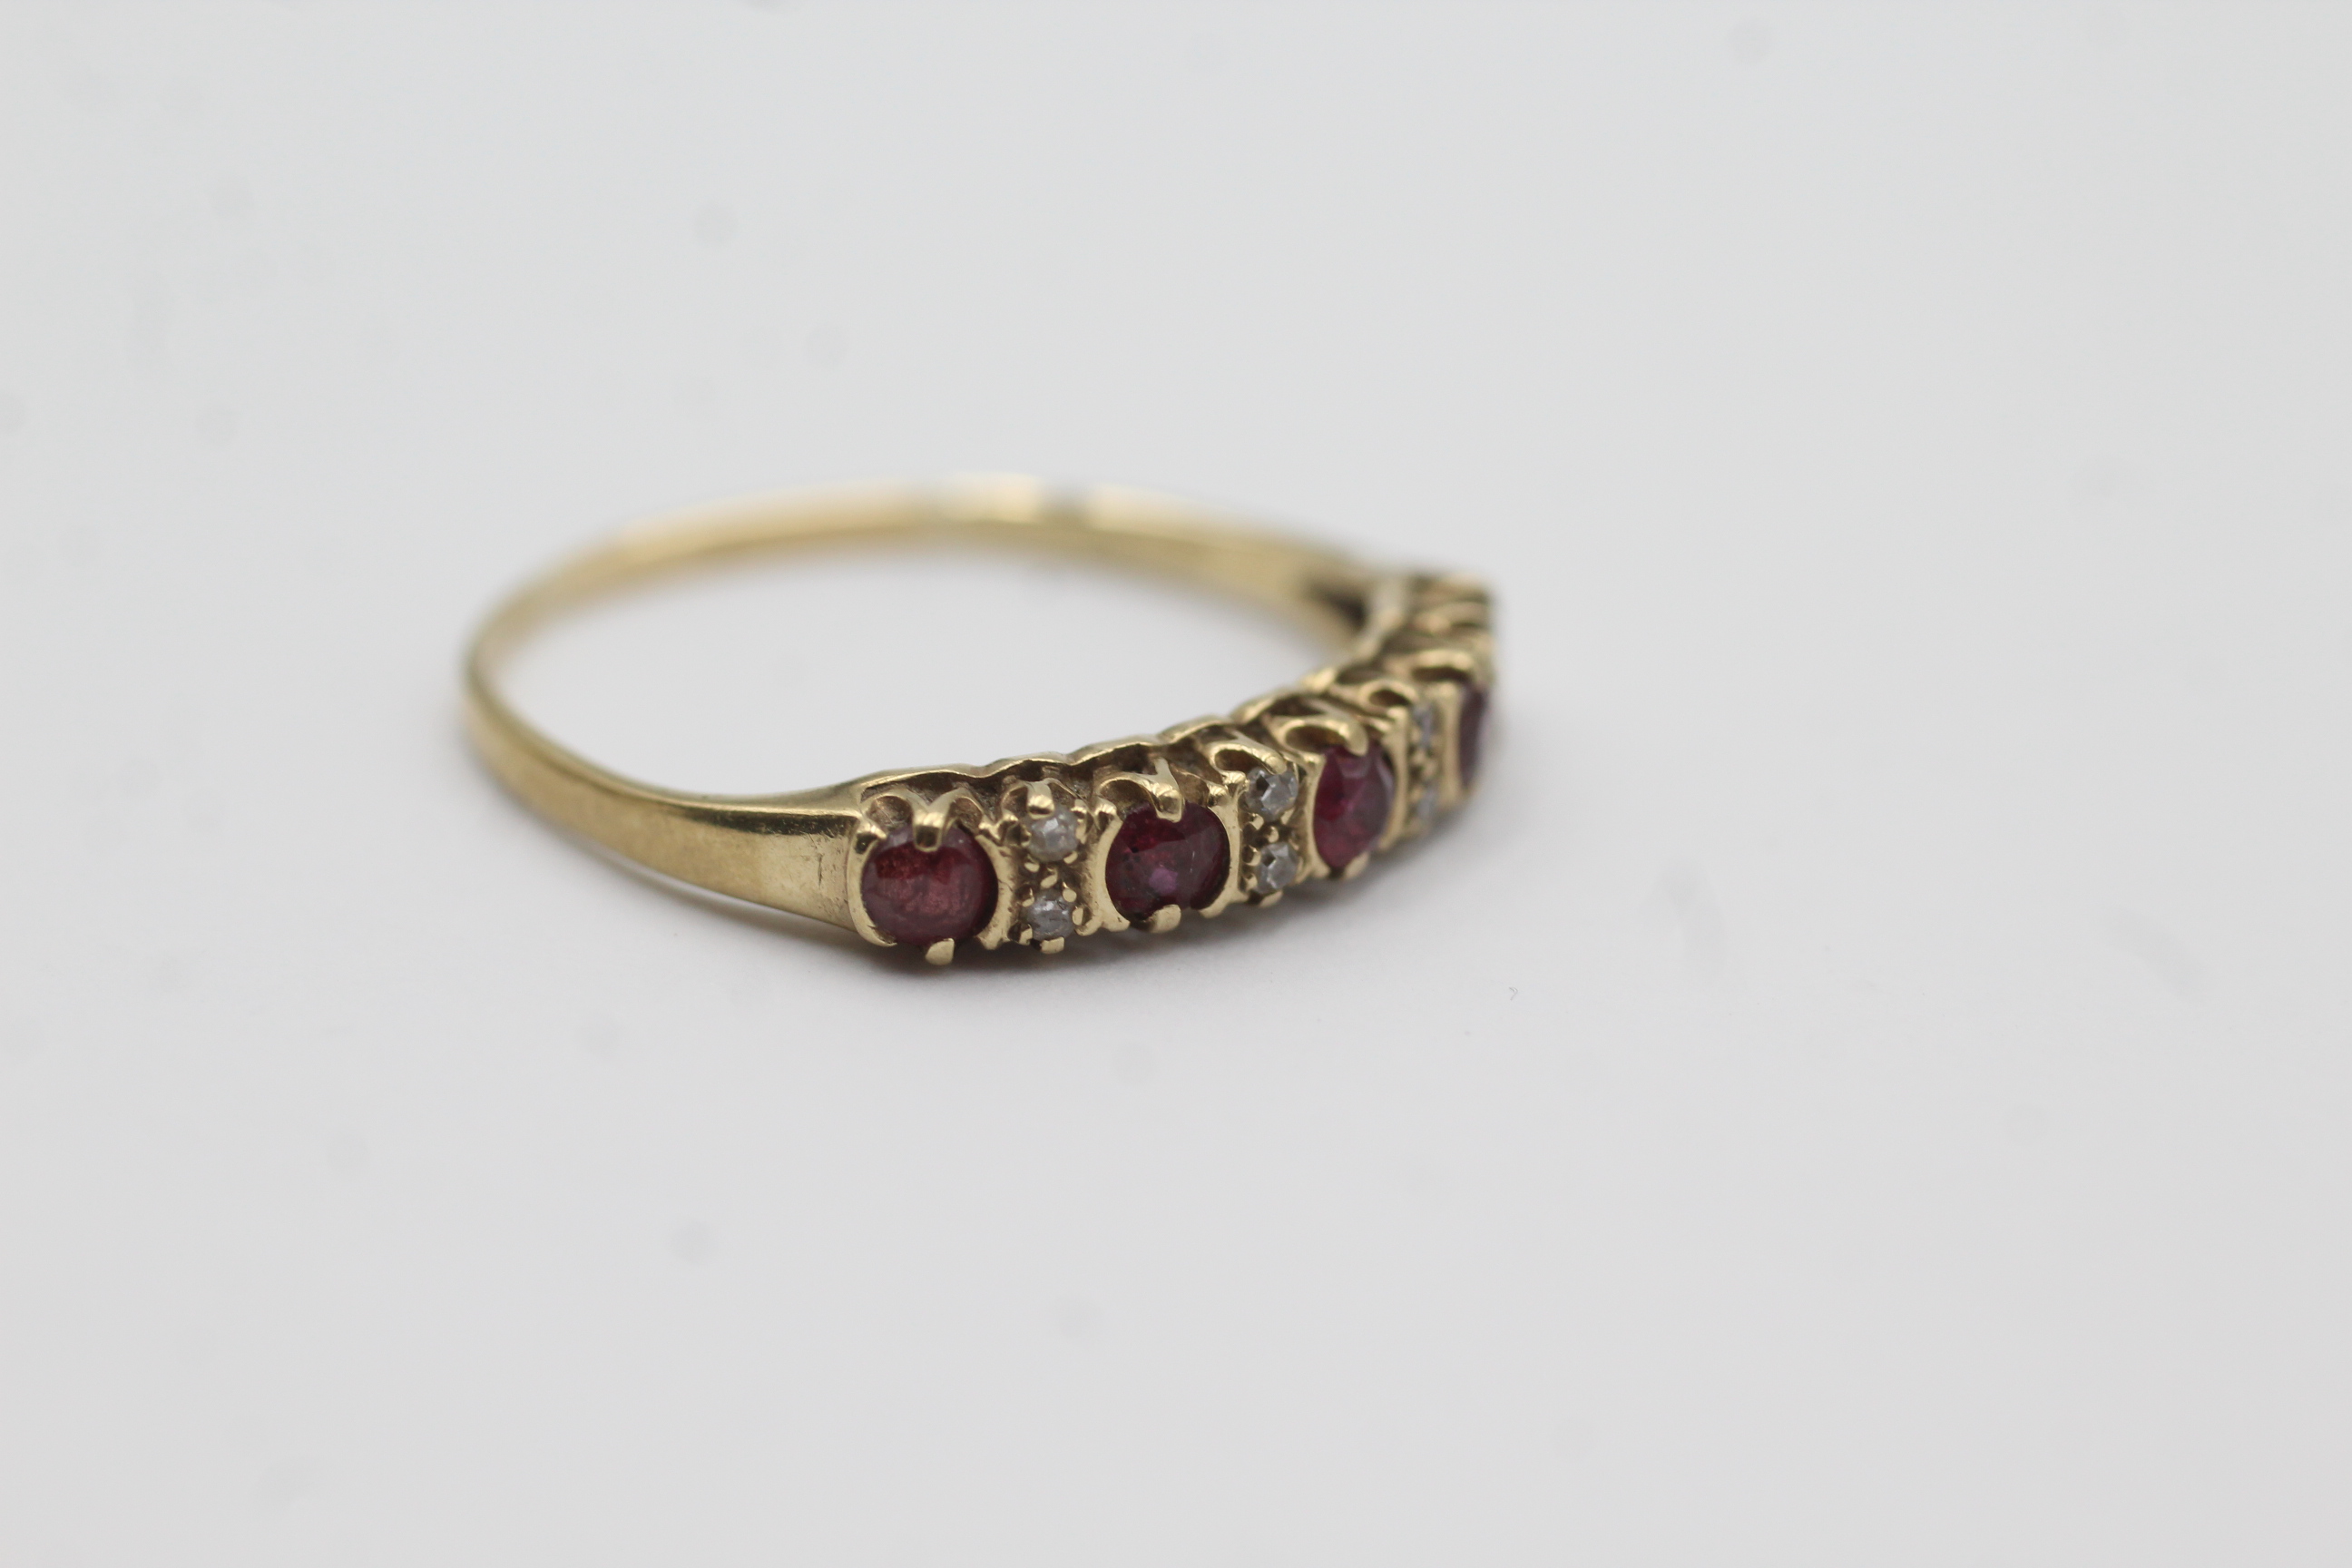 9ct gold ruby five stone ring with diamond spacers (1.4g) - Image 7 of 7